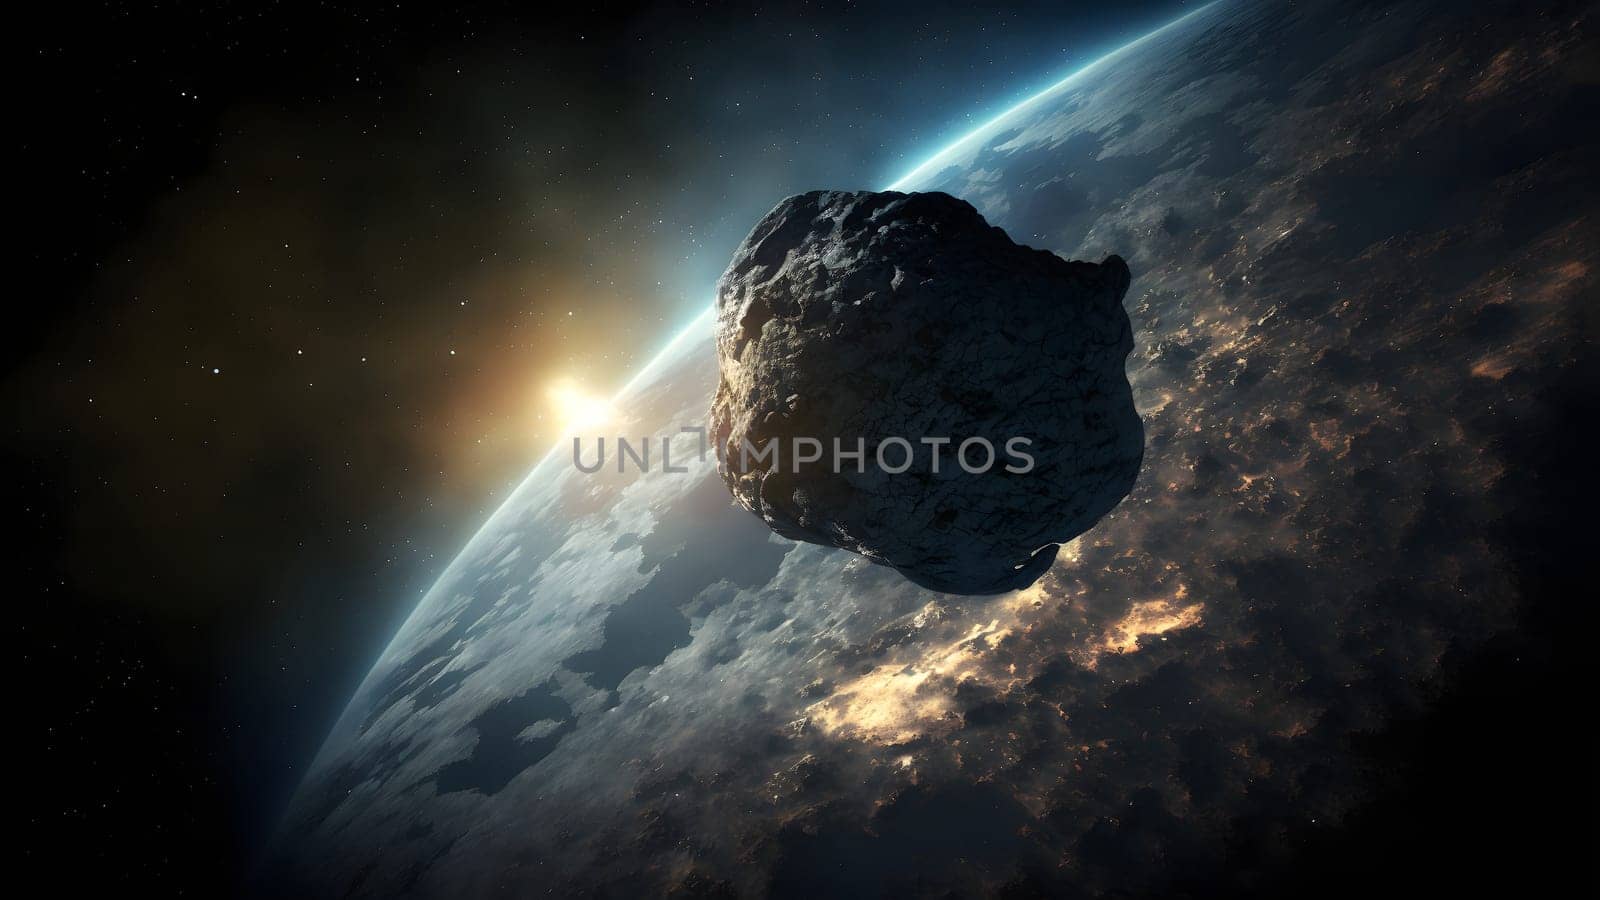 Giant asteroid cruising near planet Earth. neural network generated art by z1b